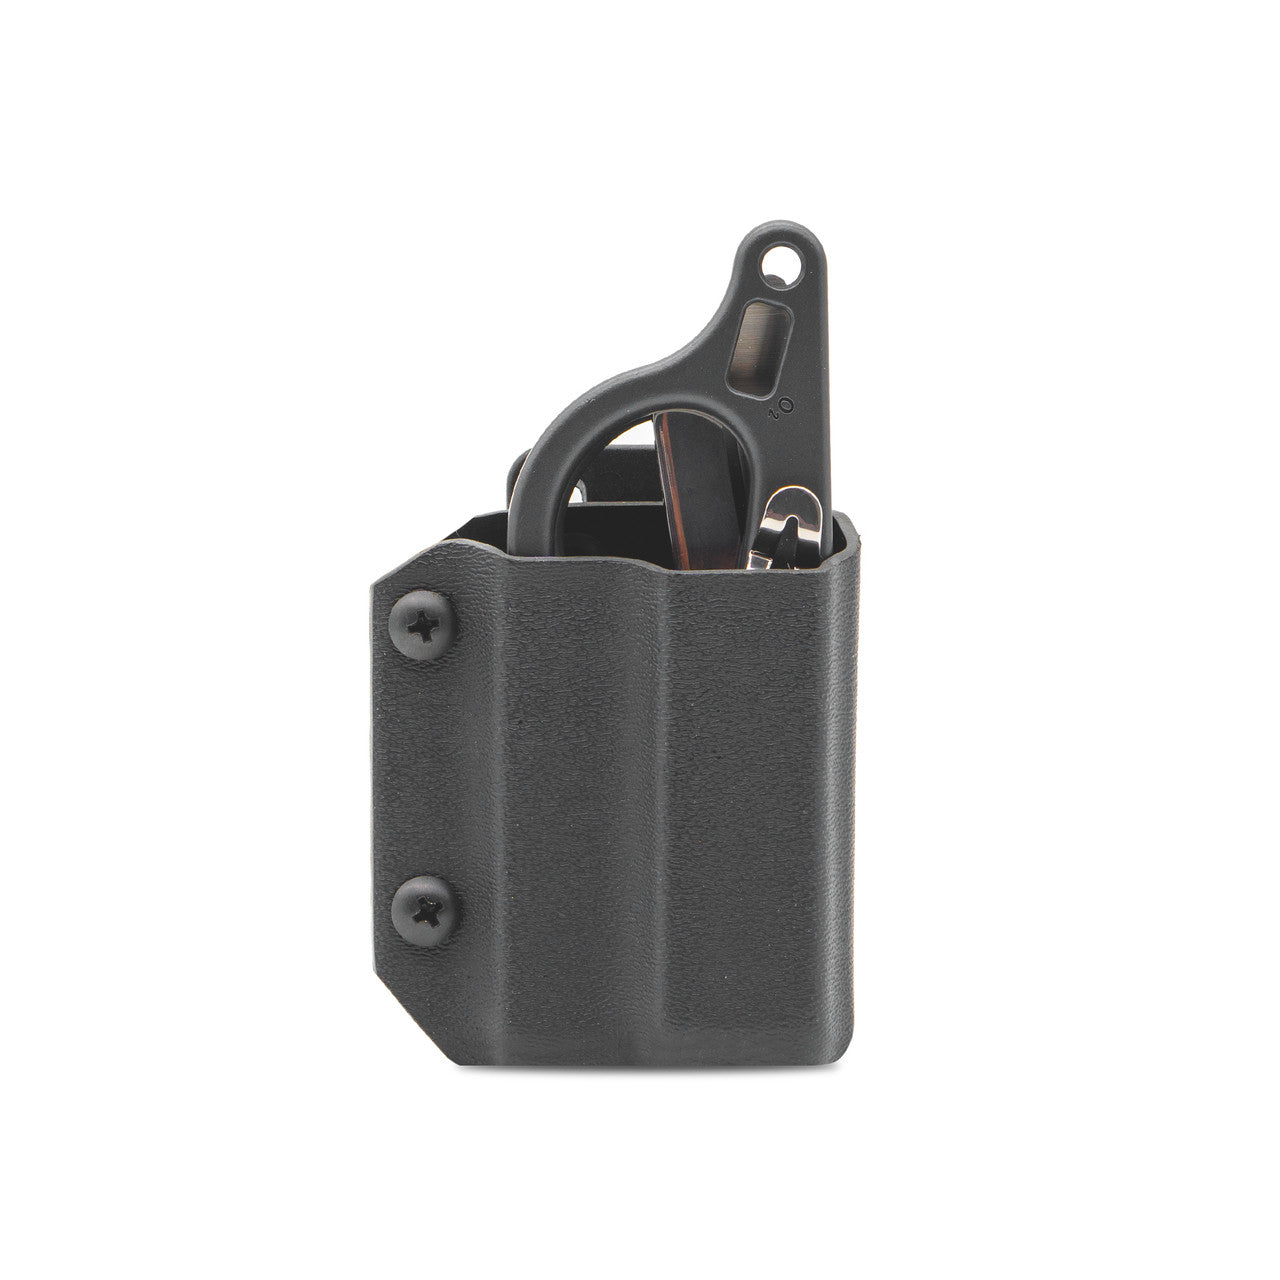 Kydex Sheath for the Leatherman Raptor Response Clip & Carry